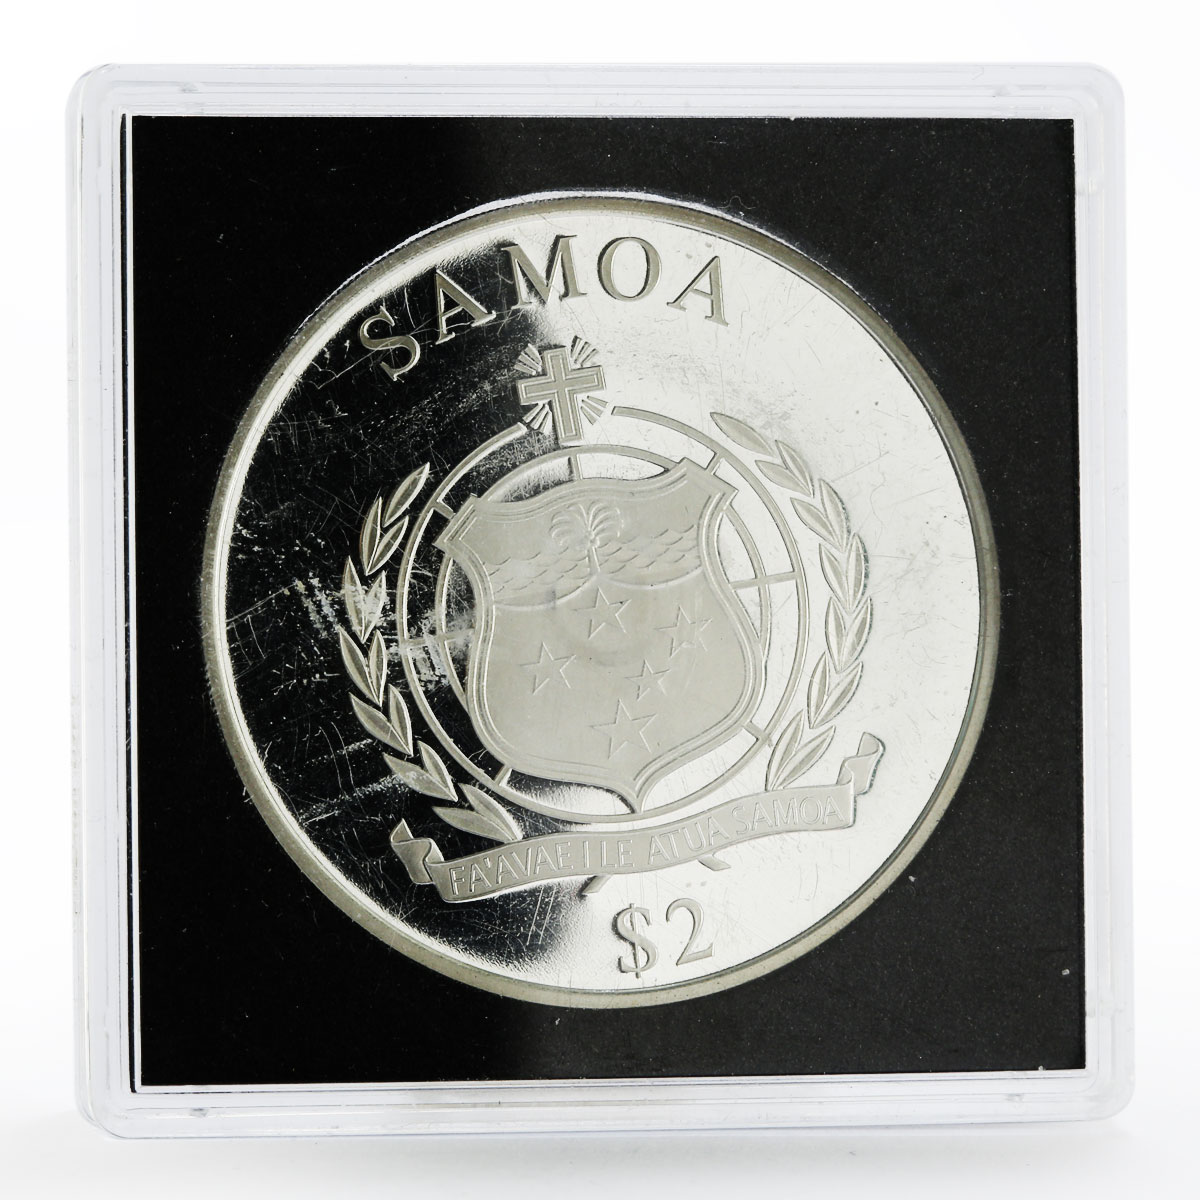 Samoa 2 dollars History in Ships series Gorch Fock proof silver coin 2015